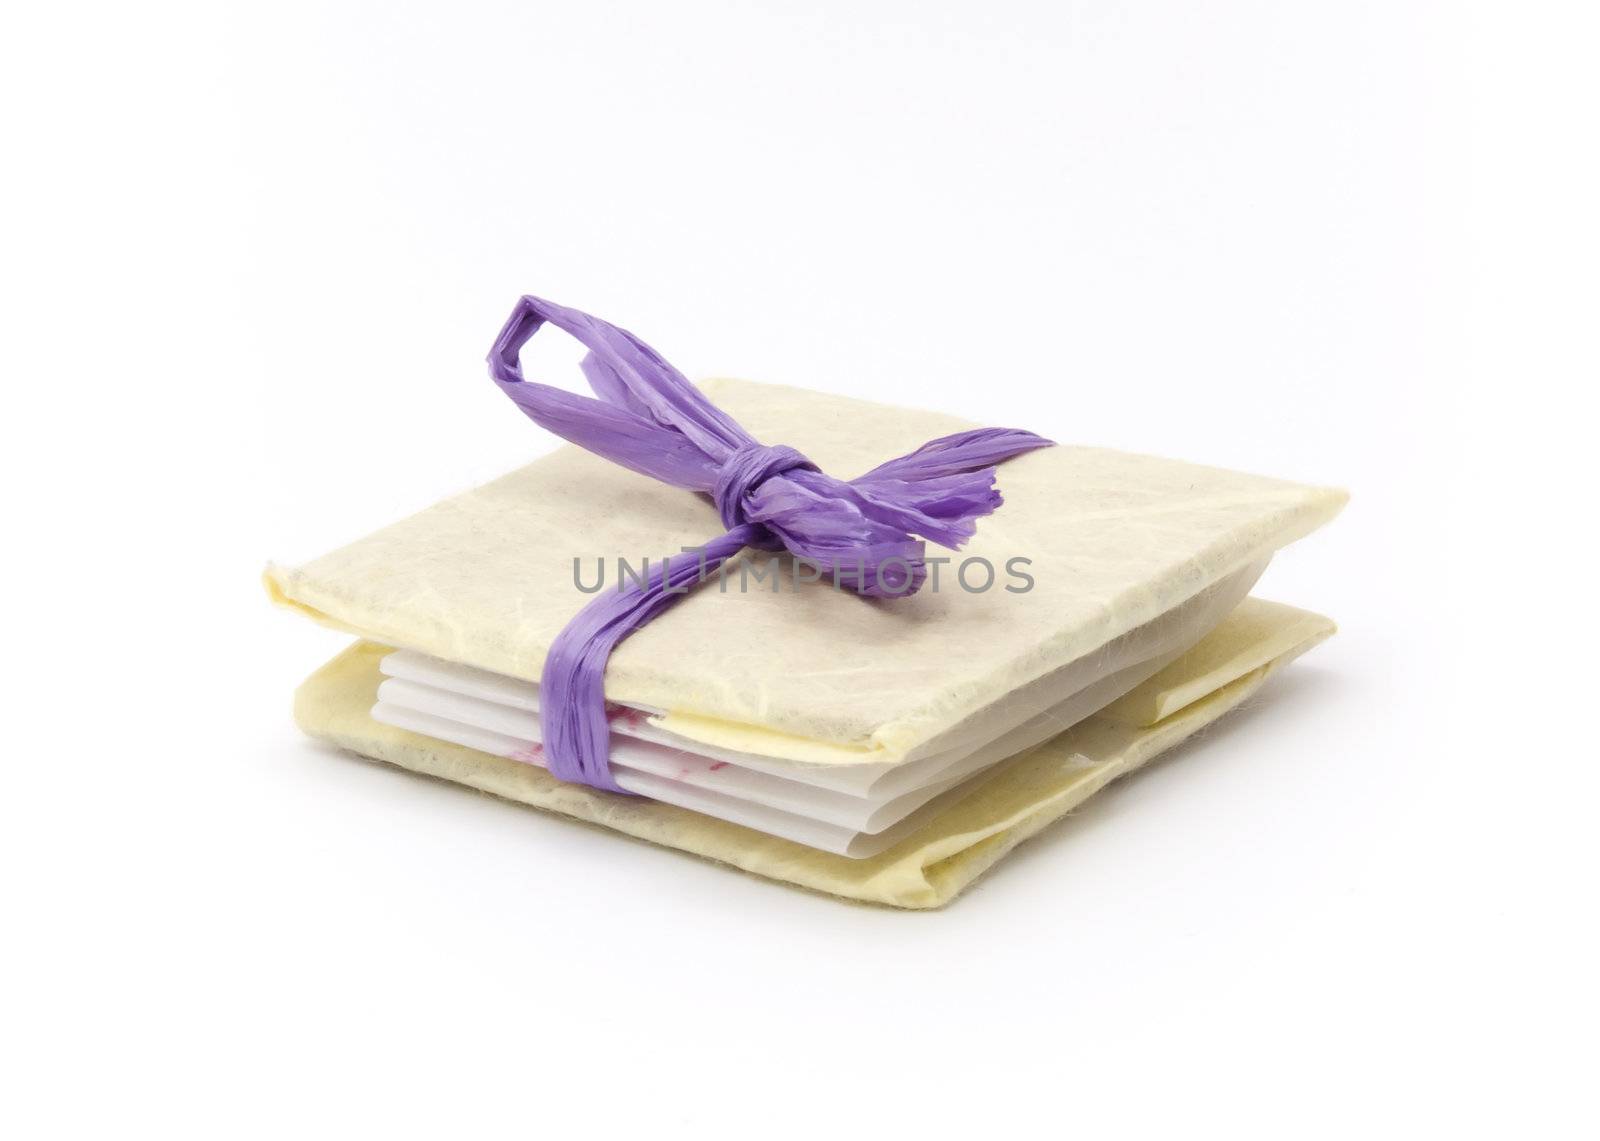 A small book tied with a purple ribbon like a present